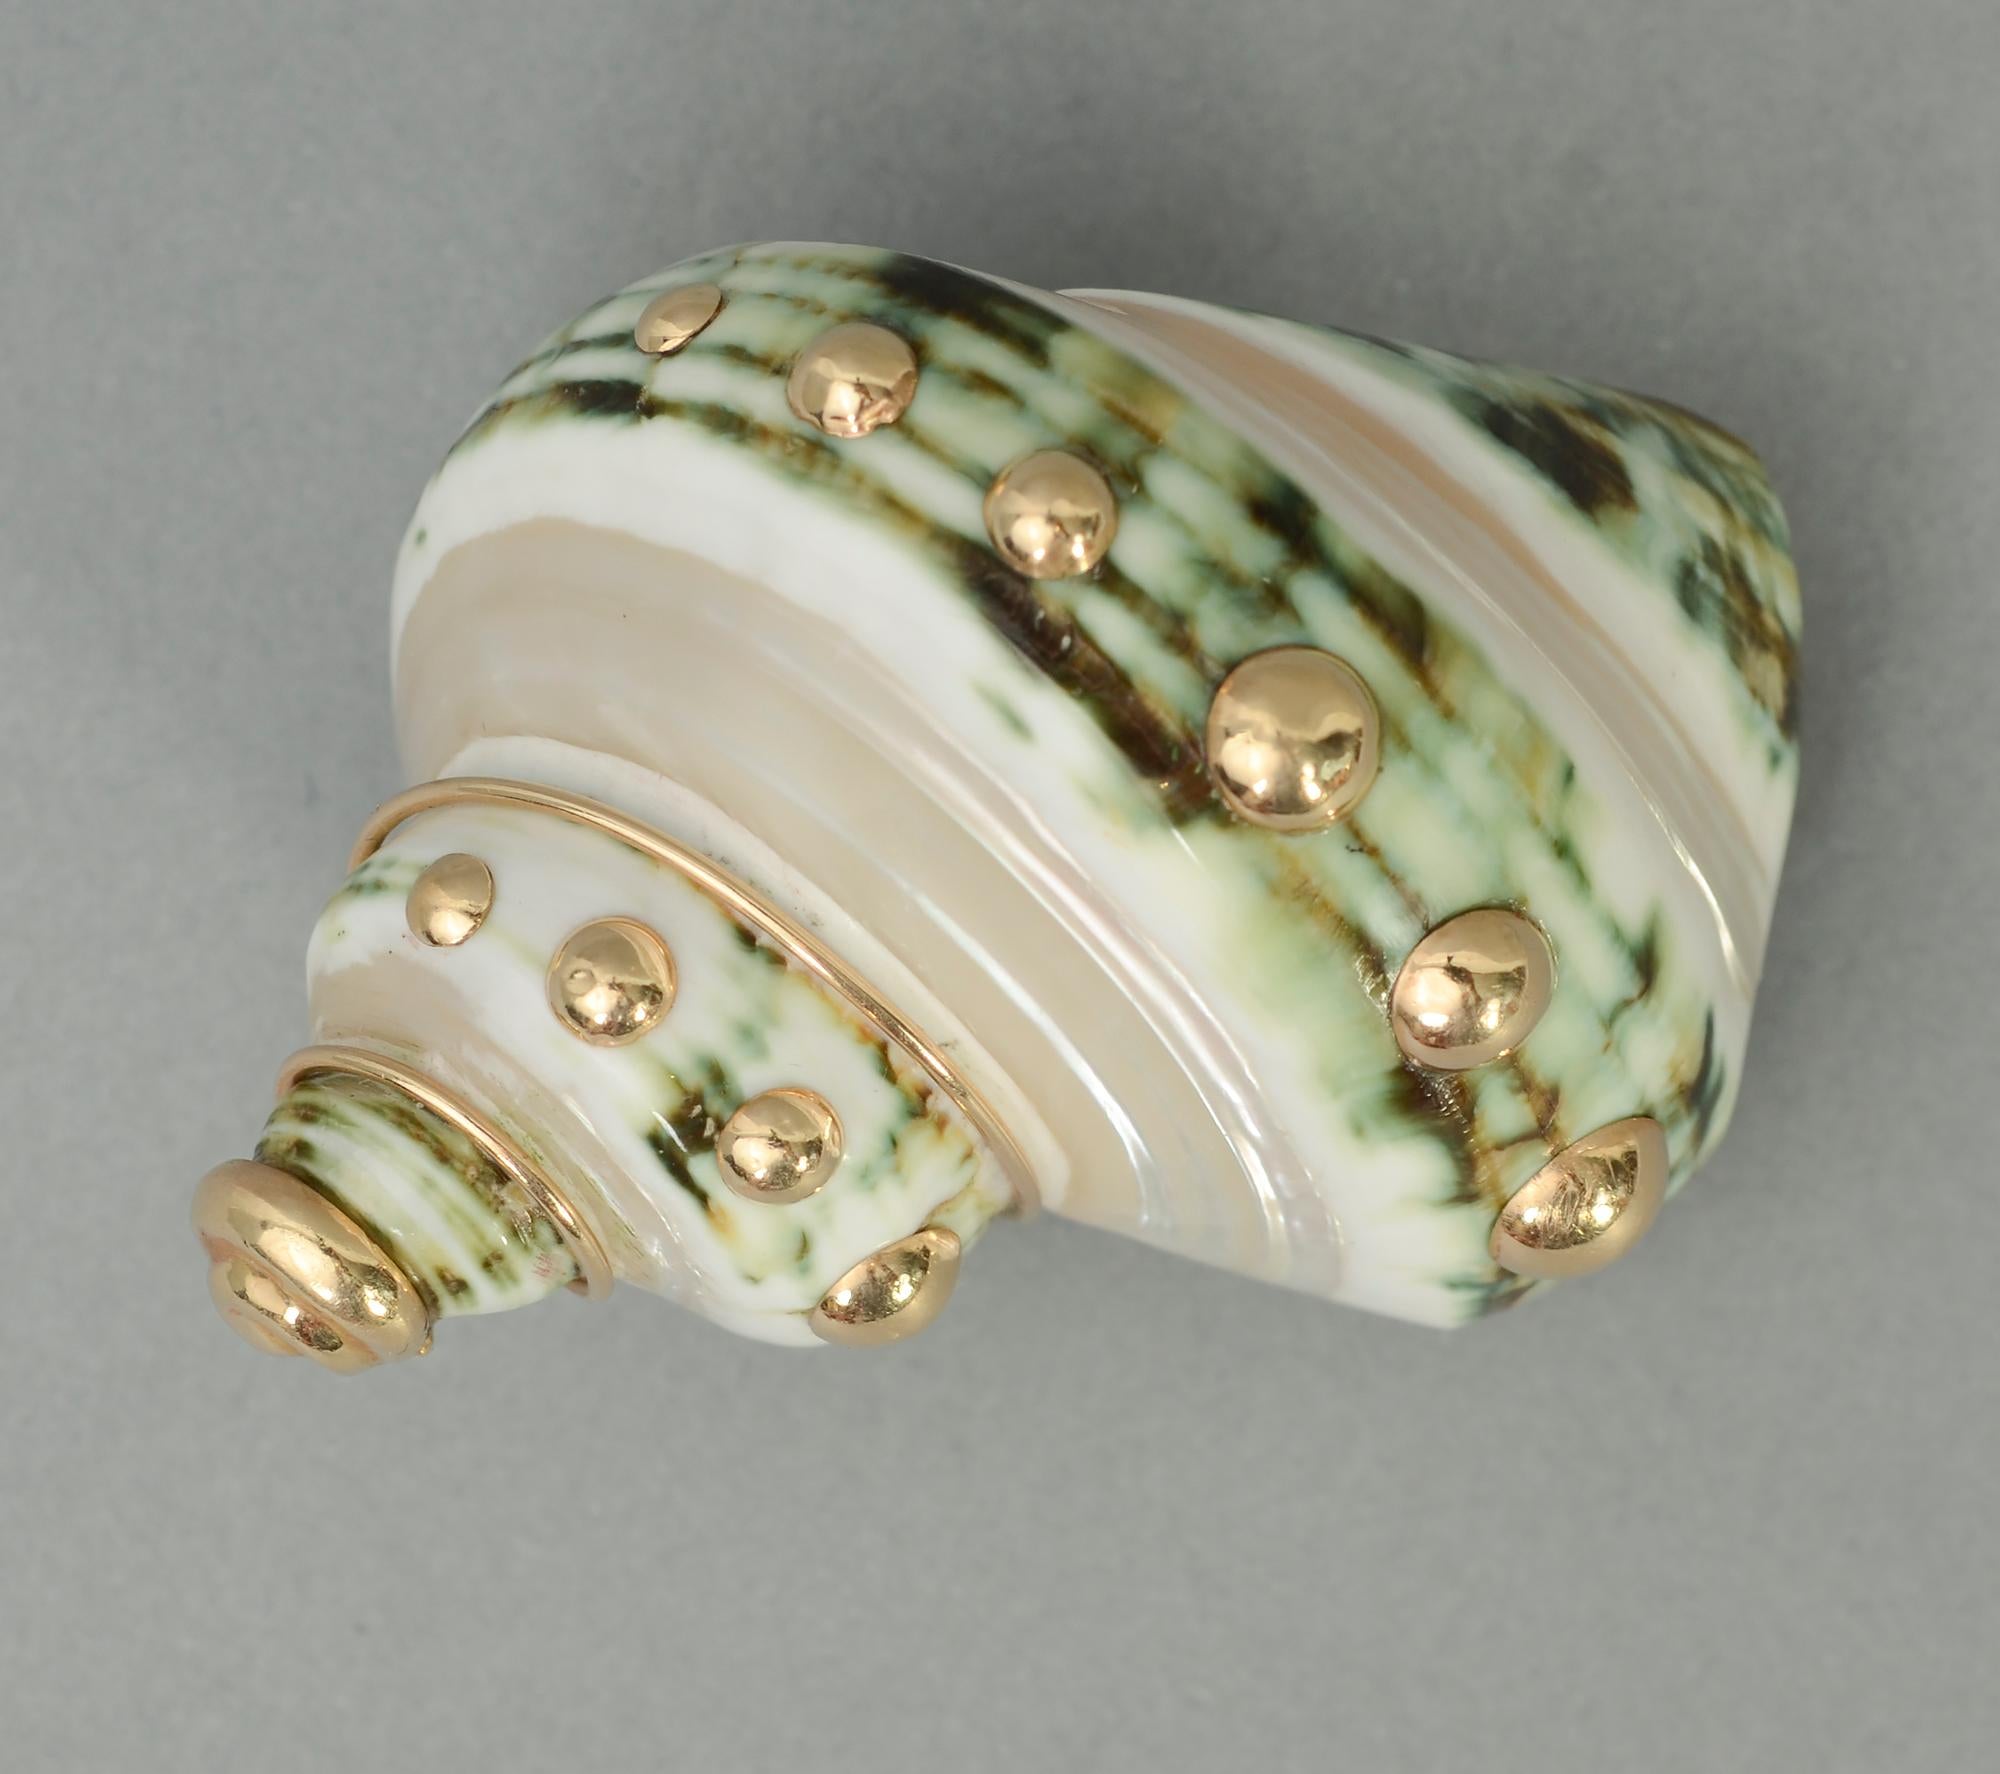 Beautiful natural shell brooch by Maz. The green has lovely shading from light to dark. Around the shell are gold dots topped with a gold shell shaped spiral. The brooch can be worn in several directions. It measures 1 3/4 inches by 2 1/2 inches at